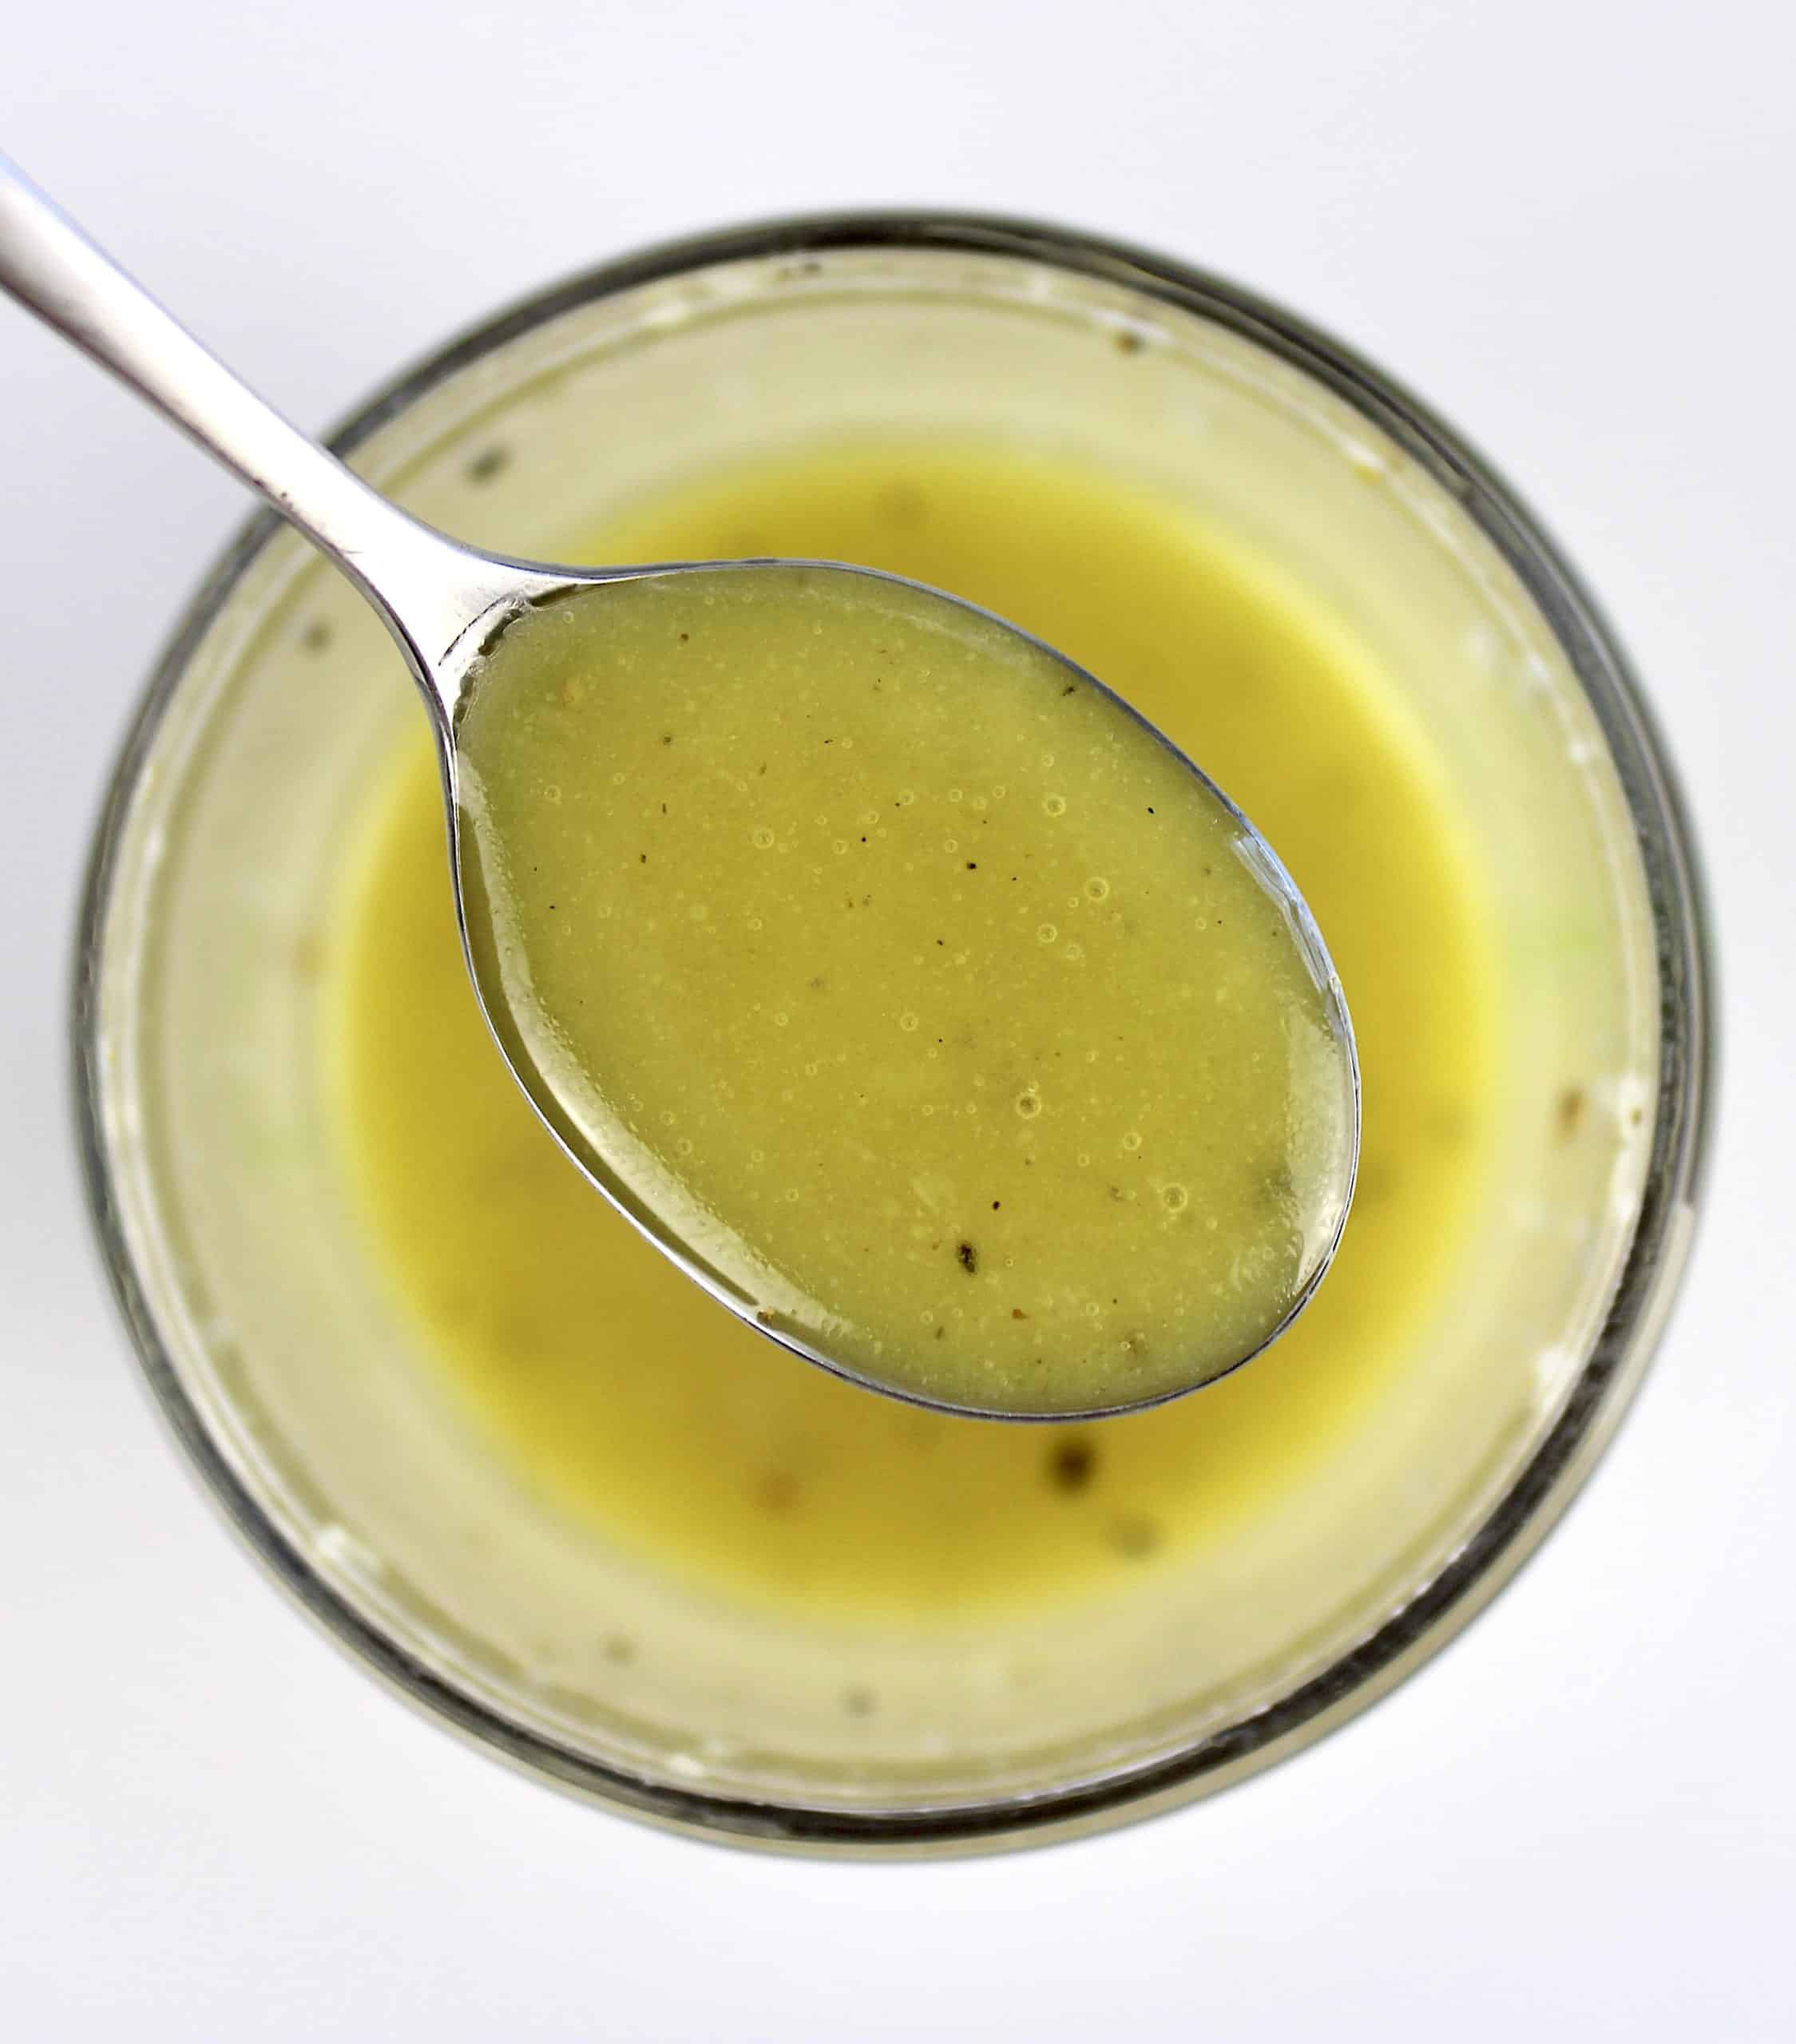 salad dressing being spooned out of container